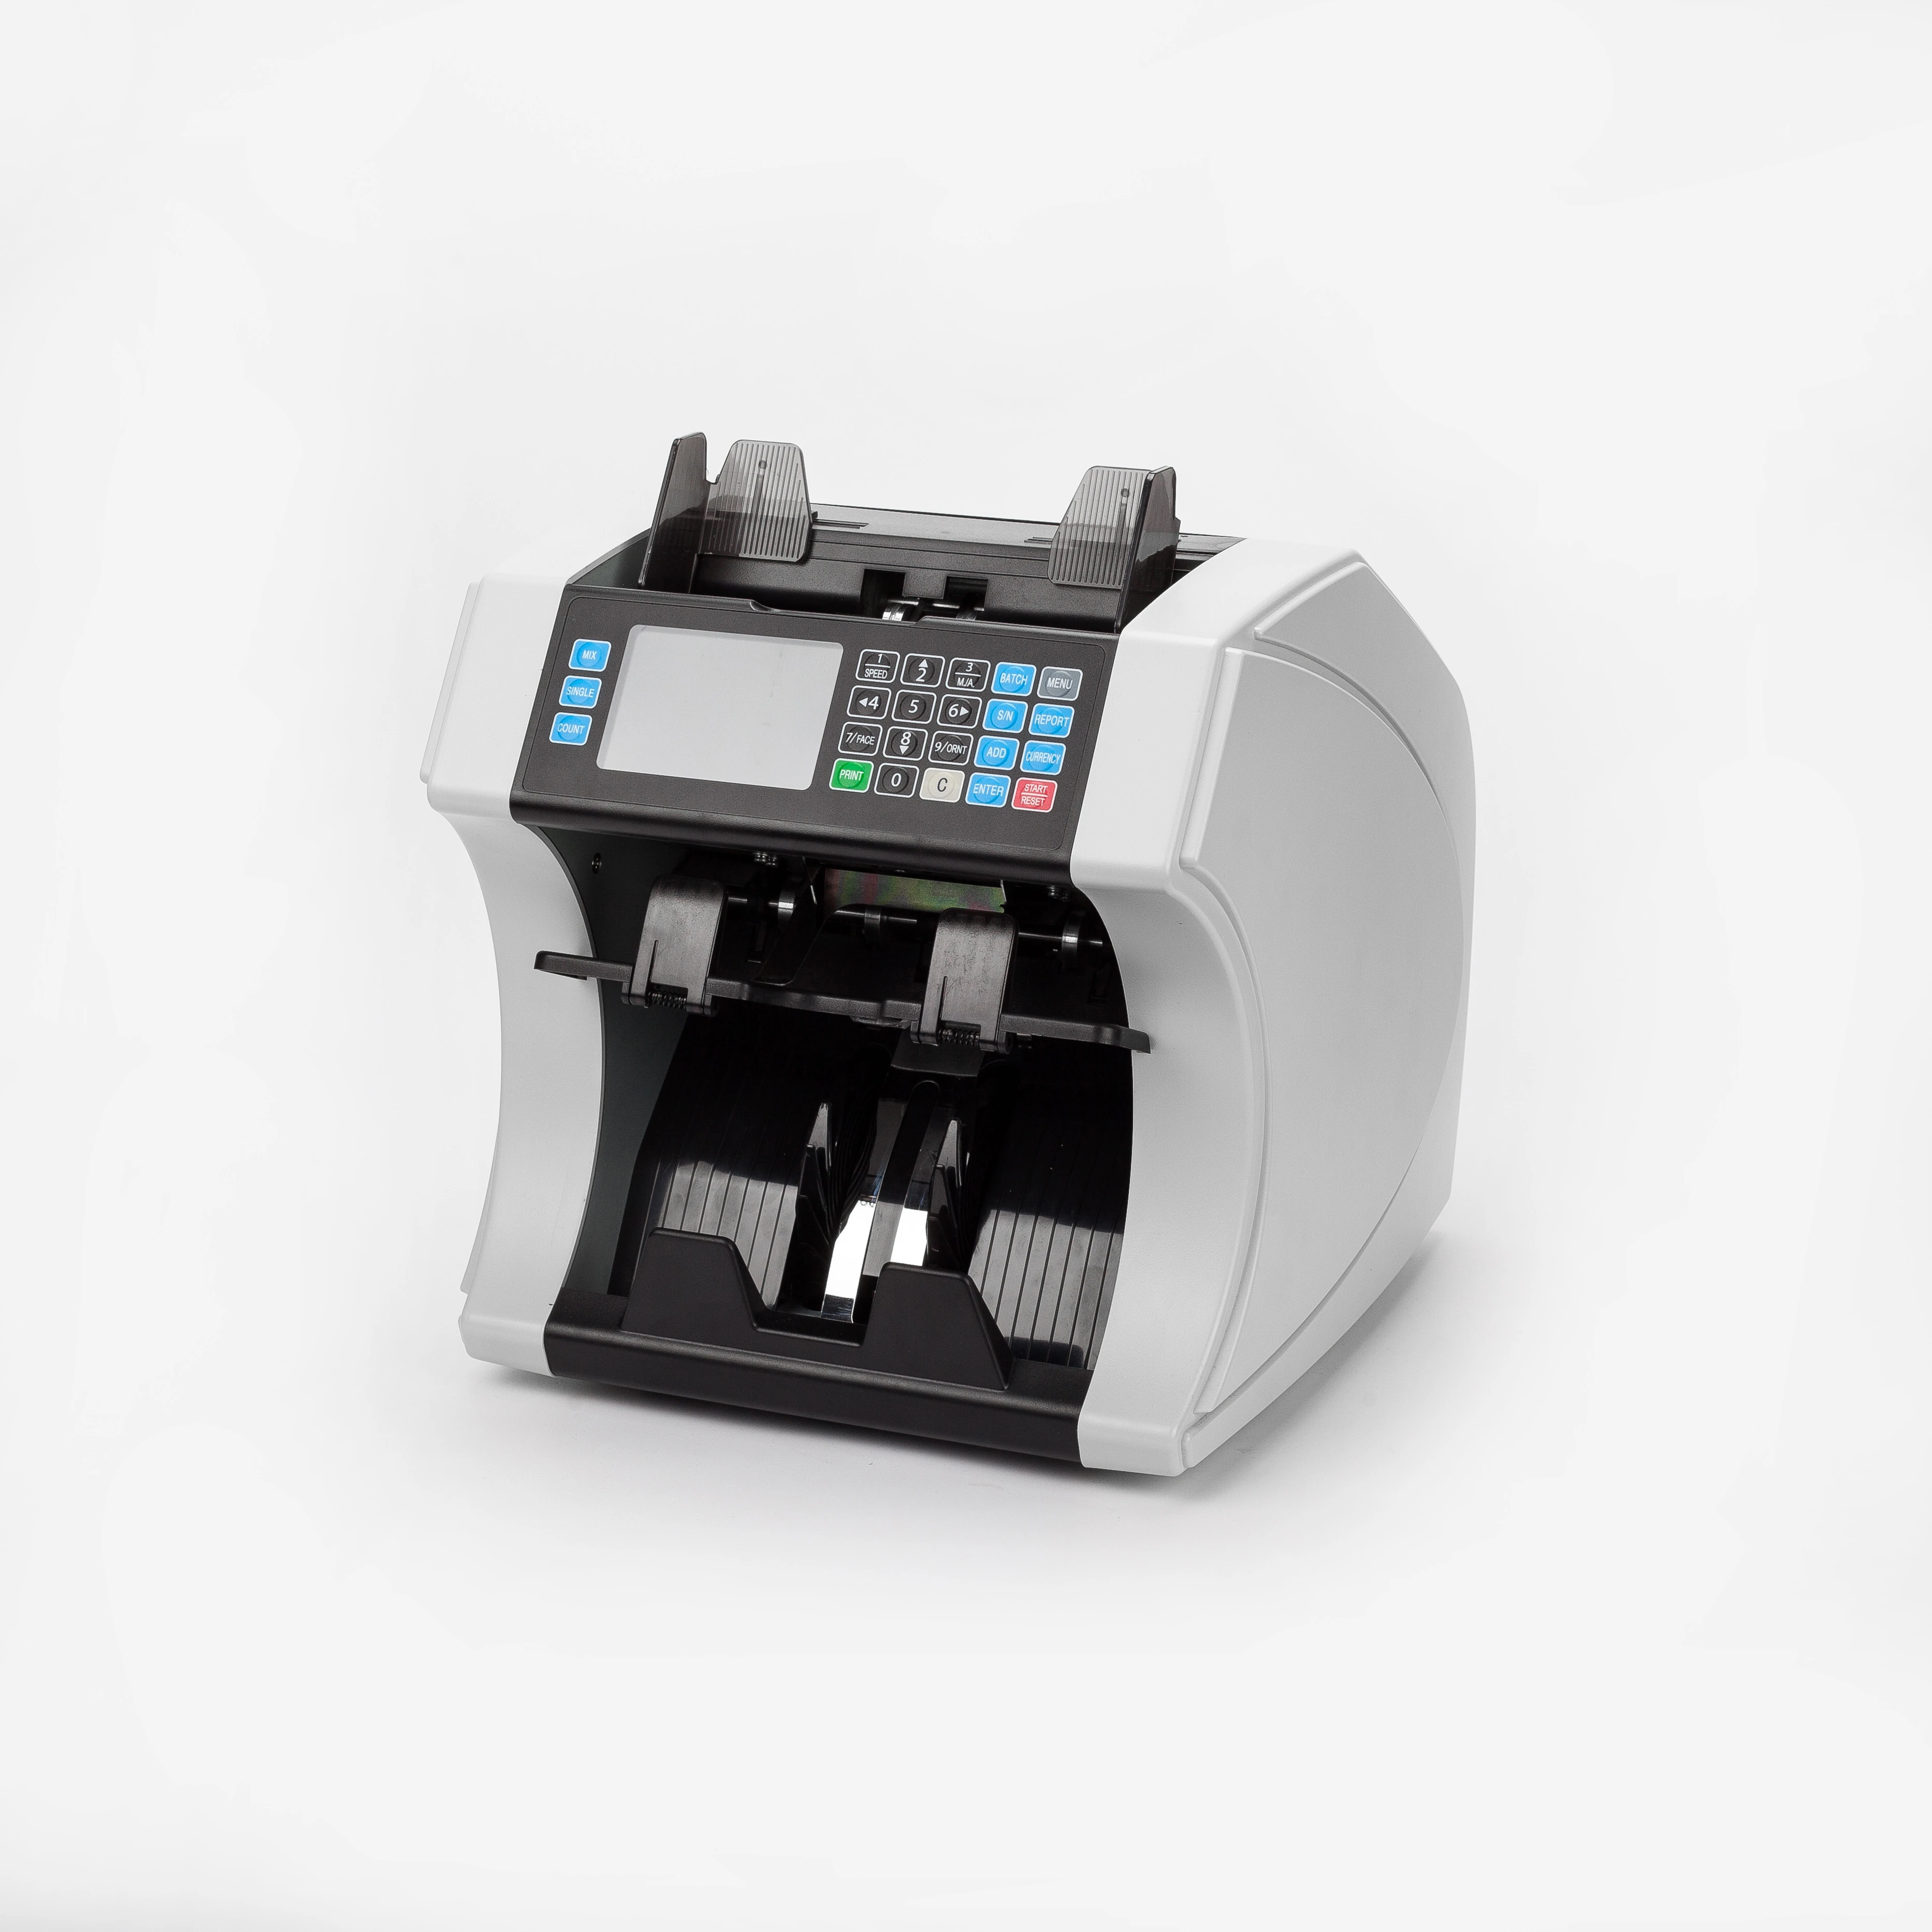 EC1689 professional two pocket bill counters double CIS in USD EURO GBPseries number  cash currency sorter machine